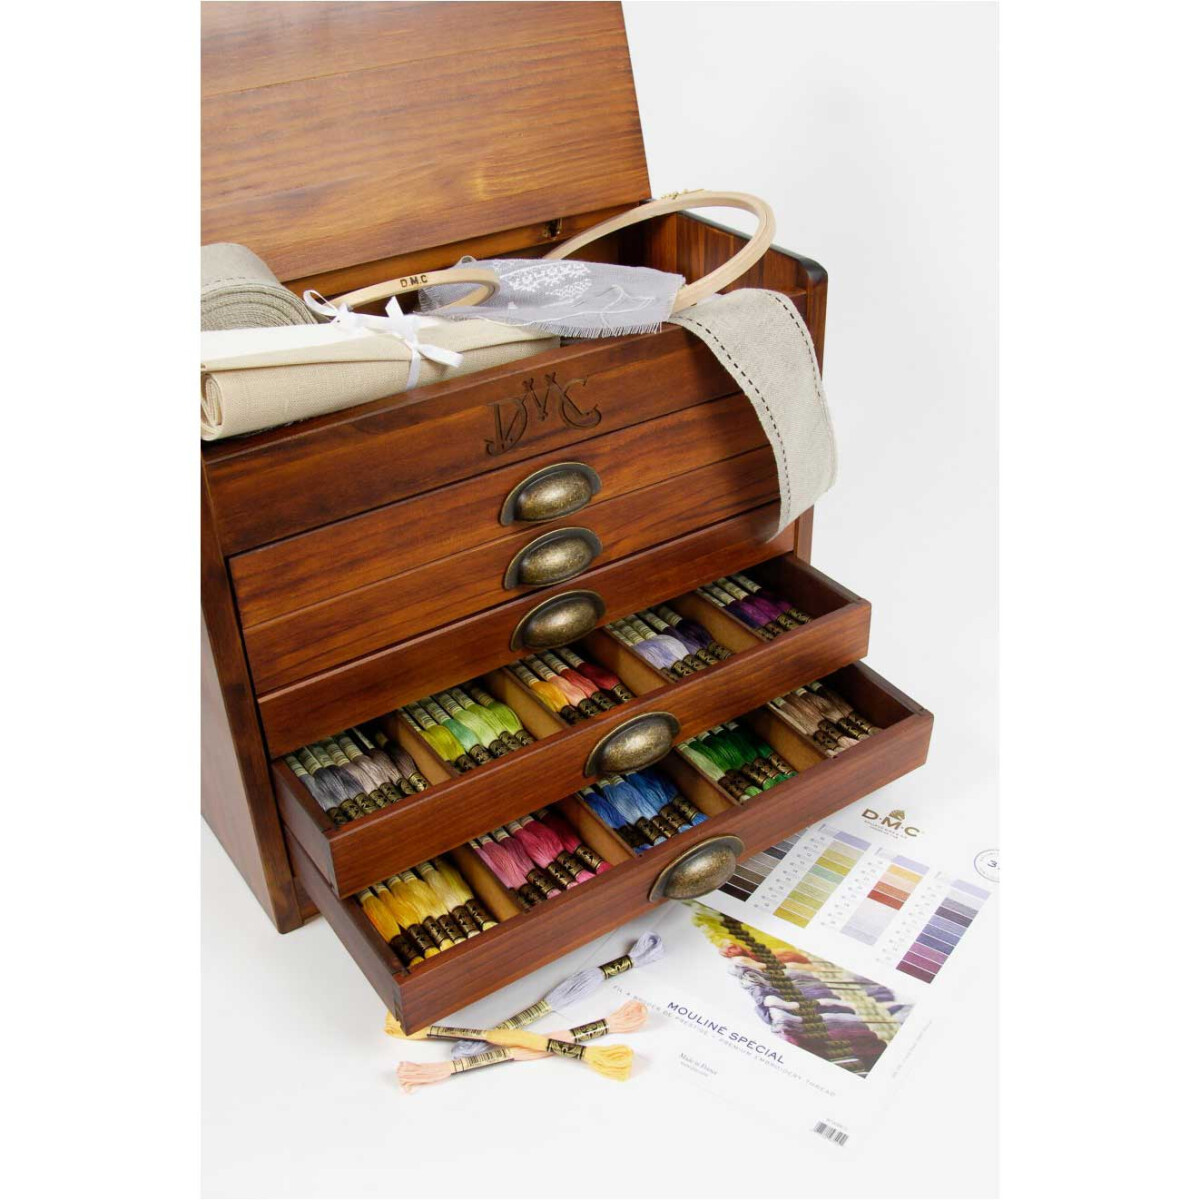 DMC vintage wooden box with 5 drawers, threads in 500...